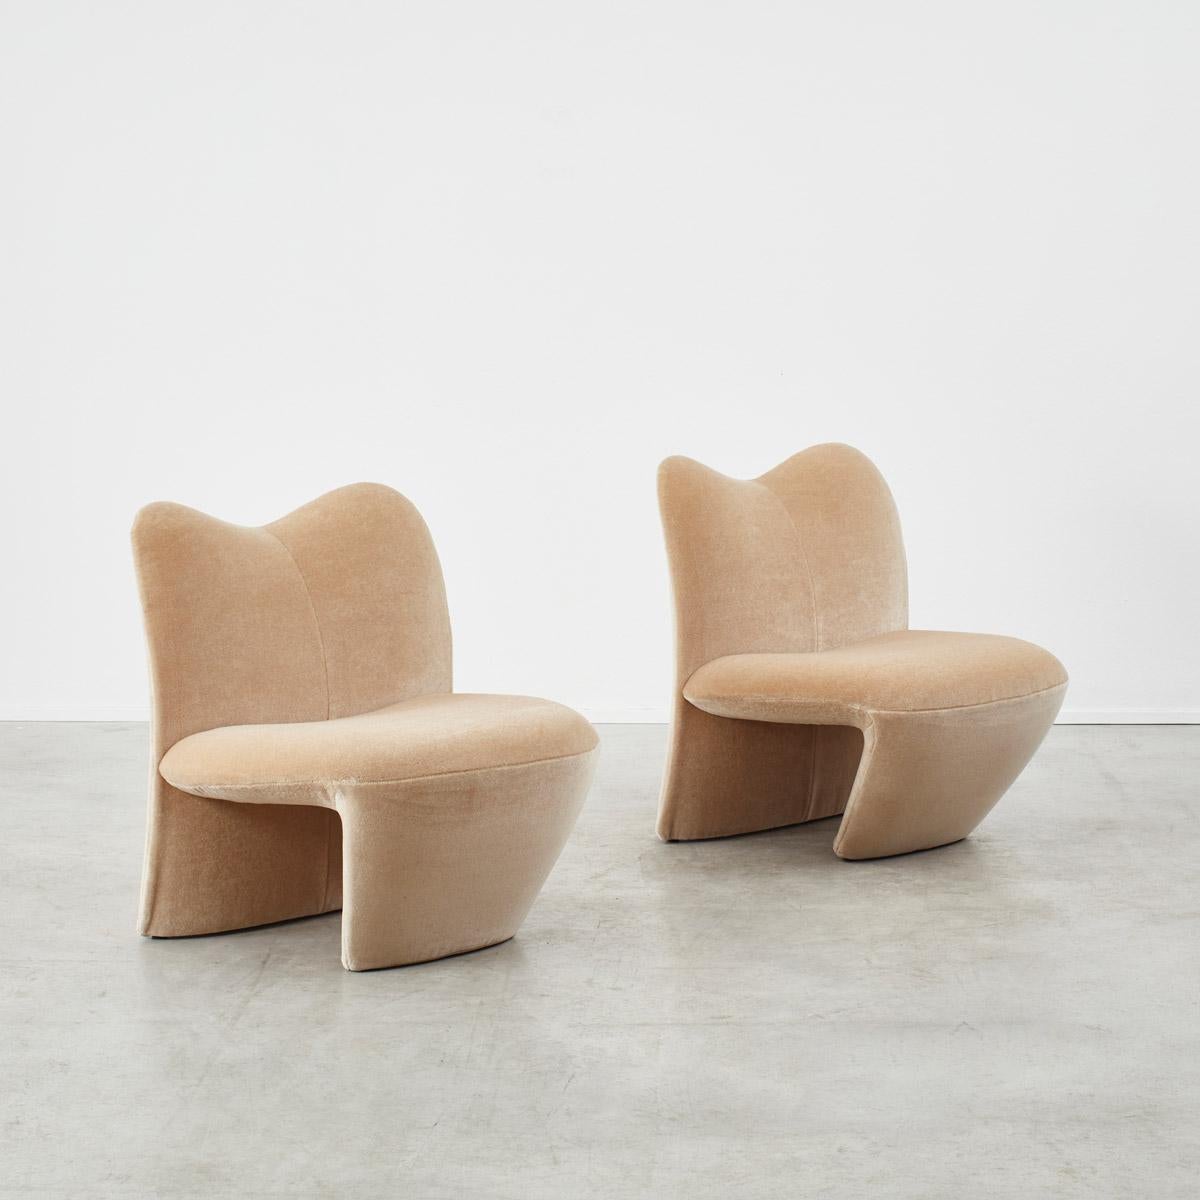 This anthropomorphic pair of Multipla lounge chairs were designed by the previously-overlooked designer Jane Dillon, alongside Peter Wheeler. Dillon (1943-present), who still works from her studio in Peckham, studied in Italy under Ettore Sottsass